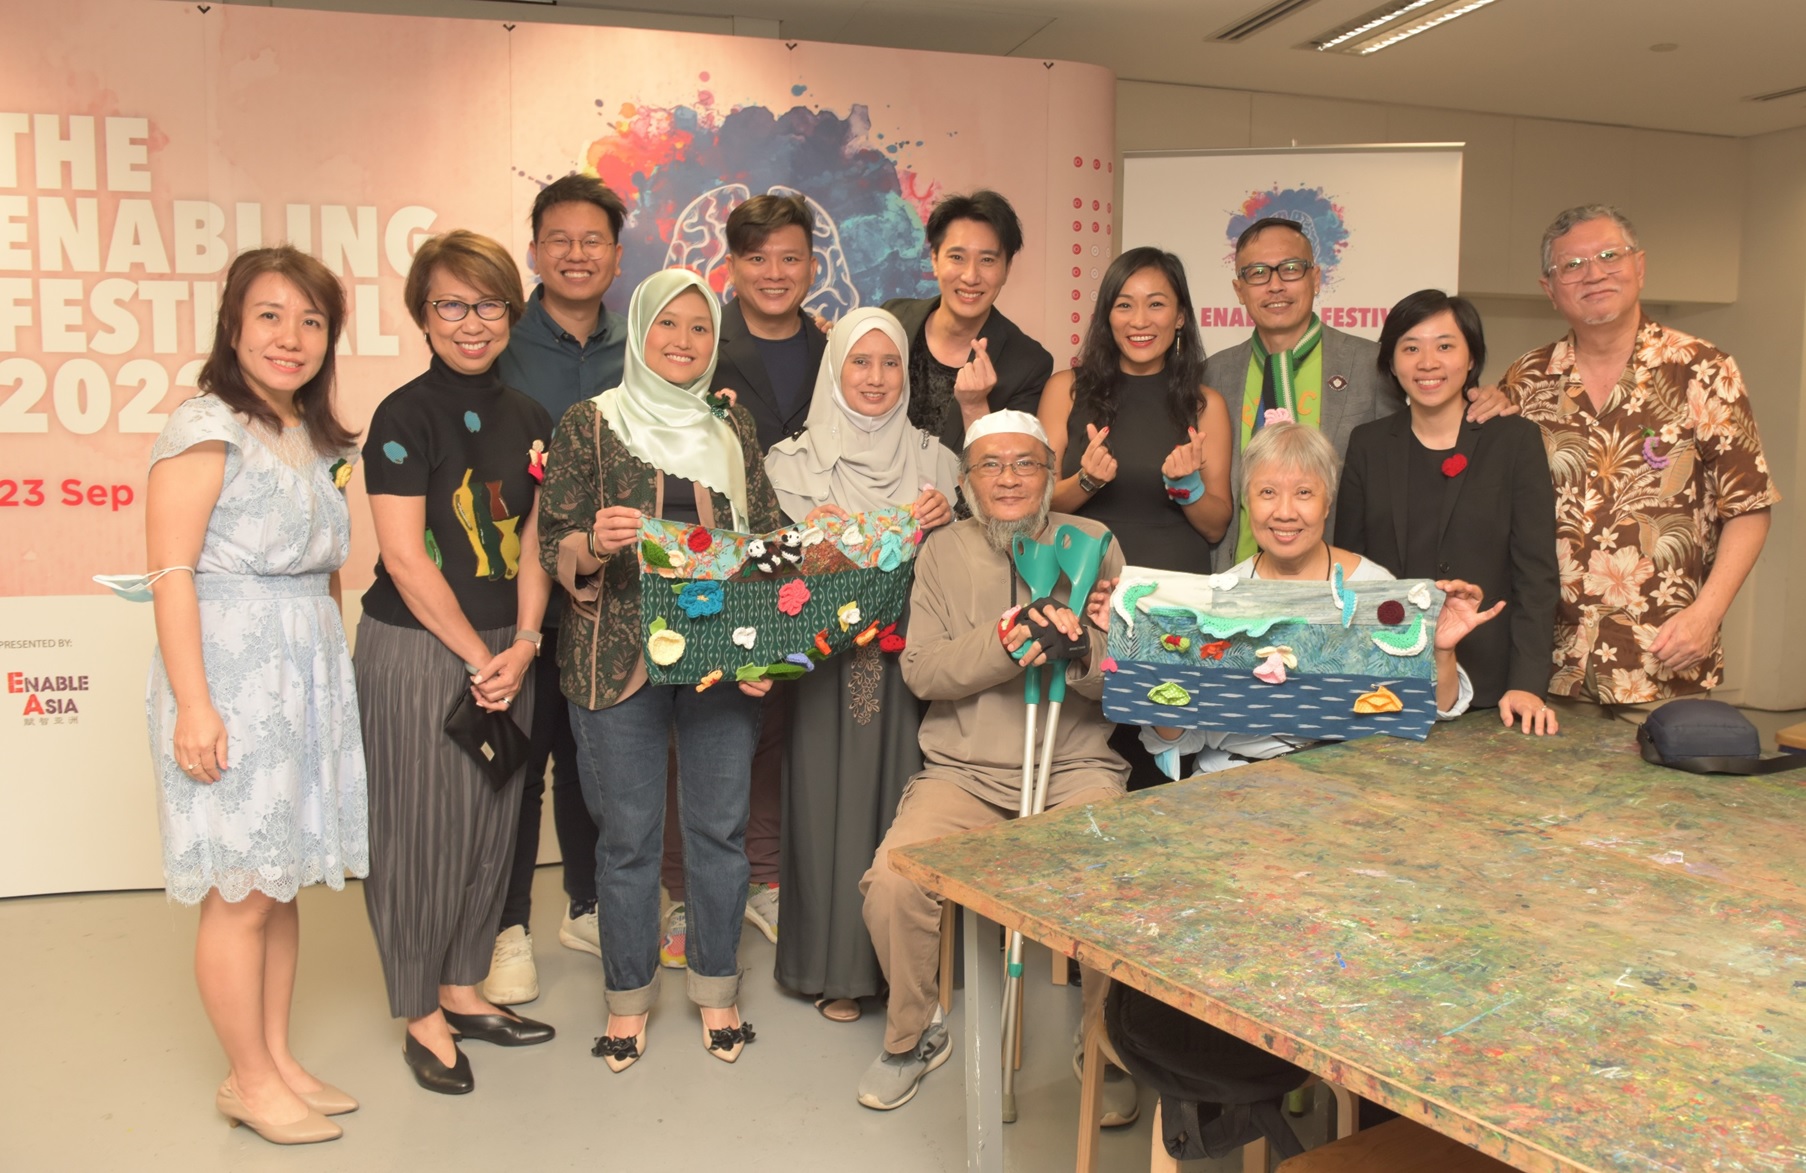 The Enabling Festival 2022 opens to support dementia-friendly Singapore through The Power of Touch